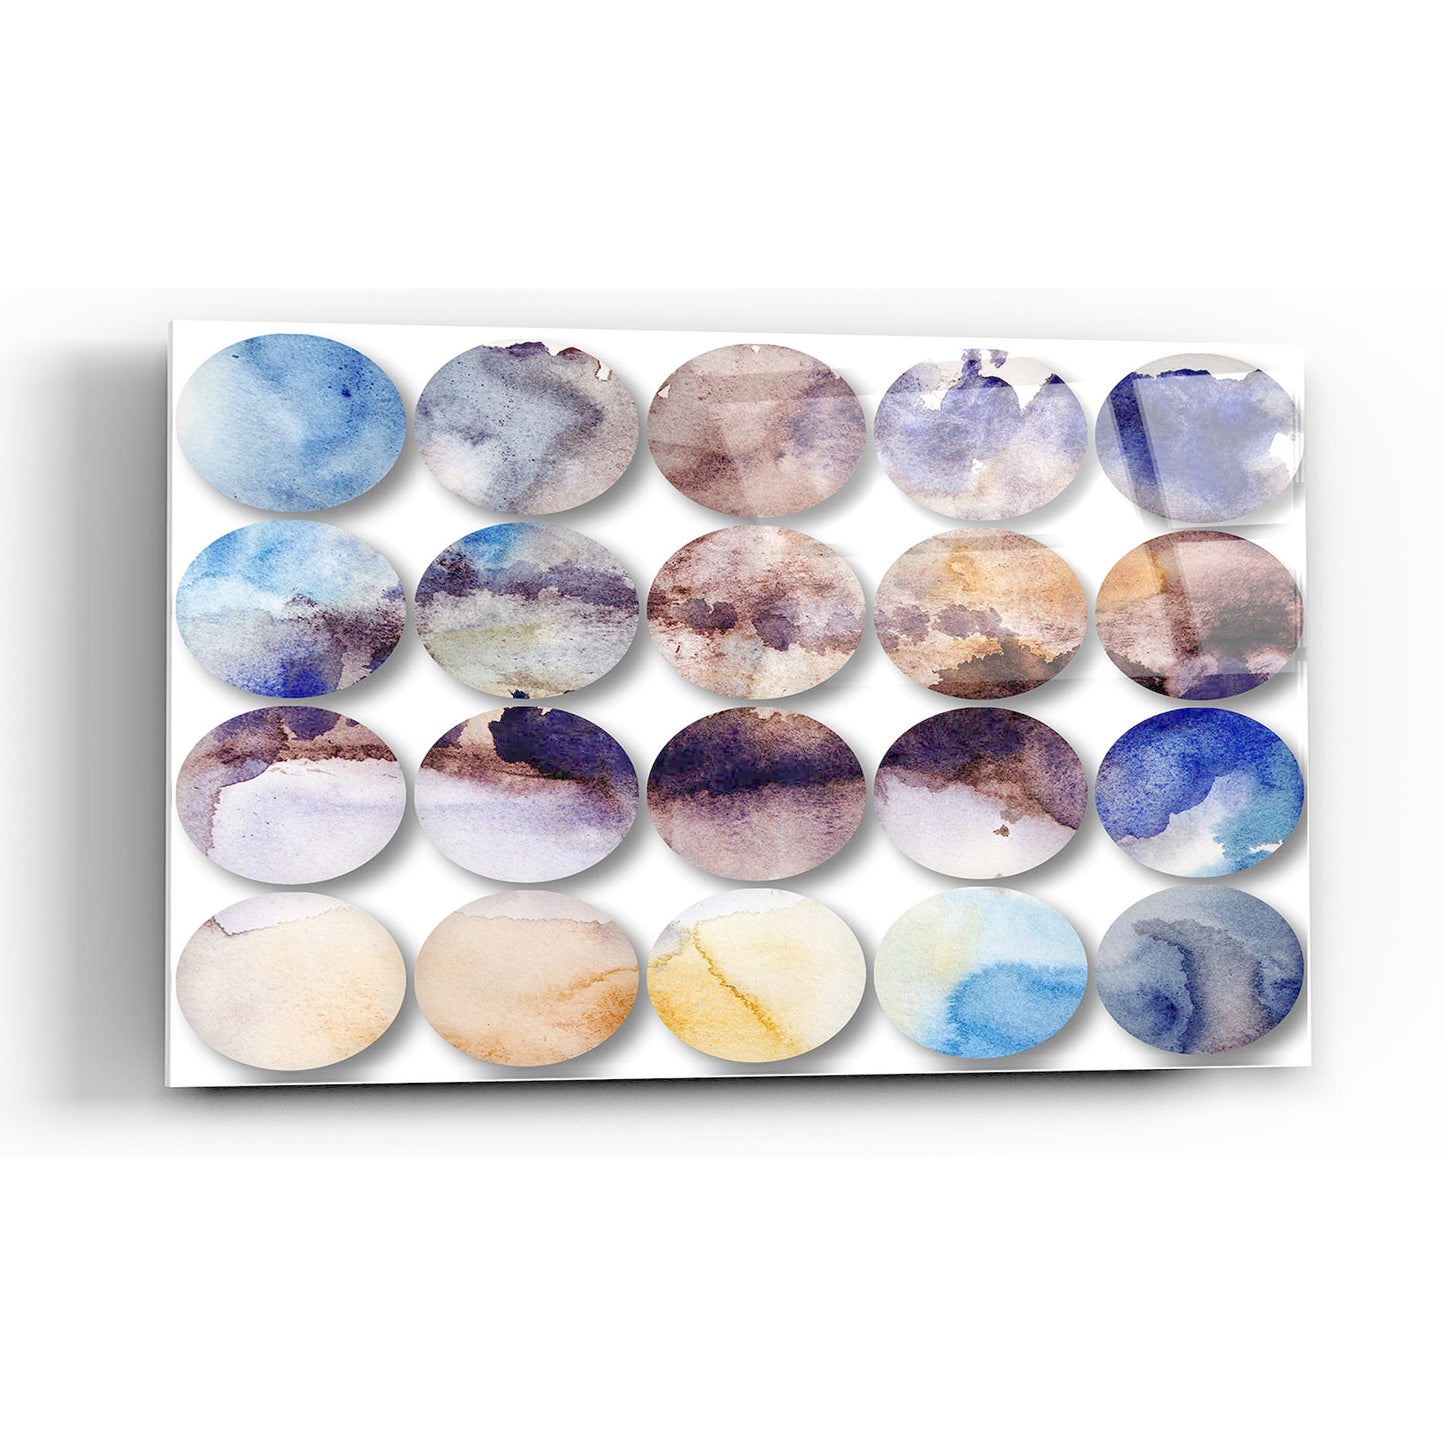 Epic Art 'Watercolor Colorful Circles 4' by Irena Orlov, Acrylic Glass Wall Art,12x16